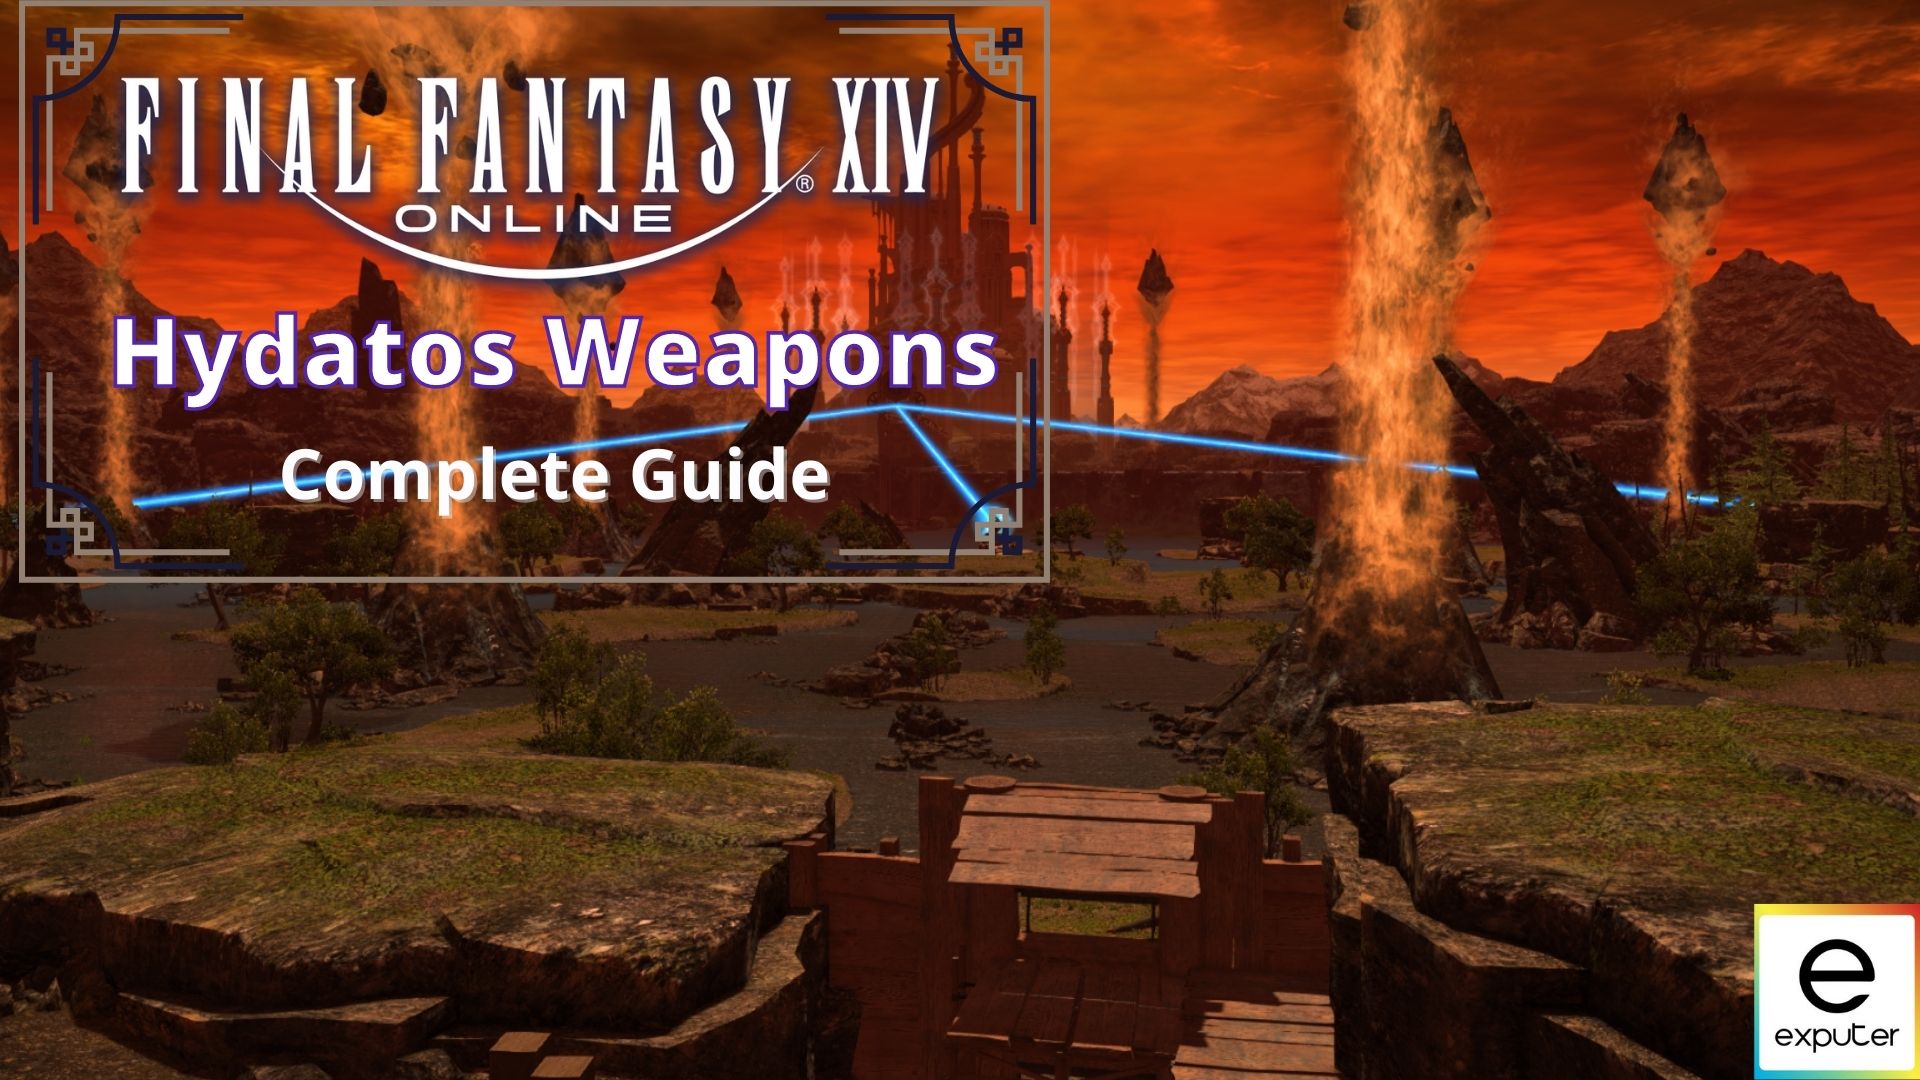 Hydatos weapons in FFXIV